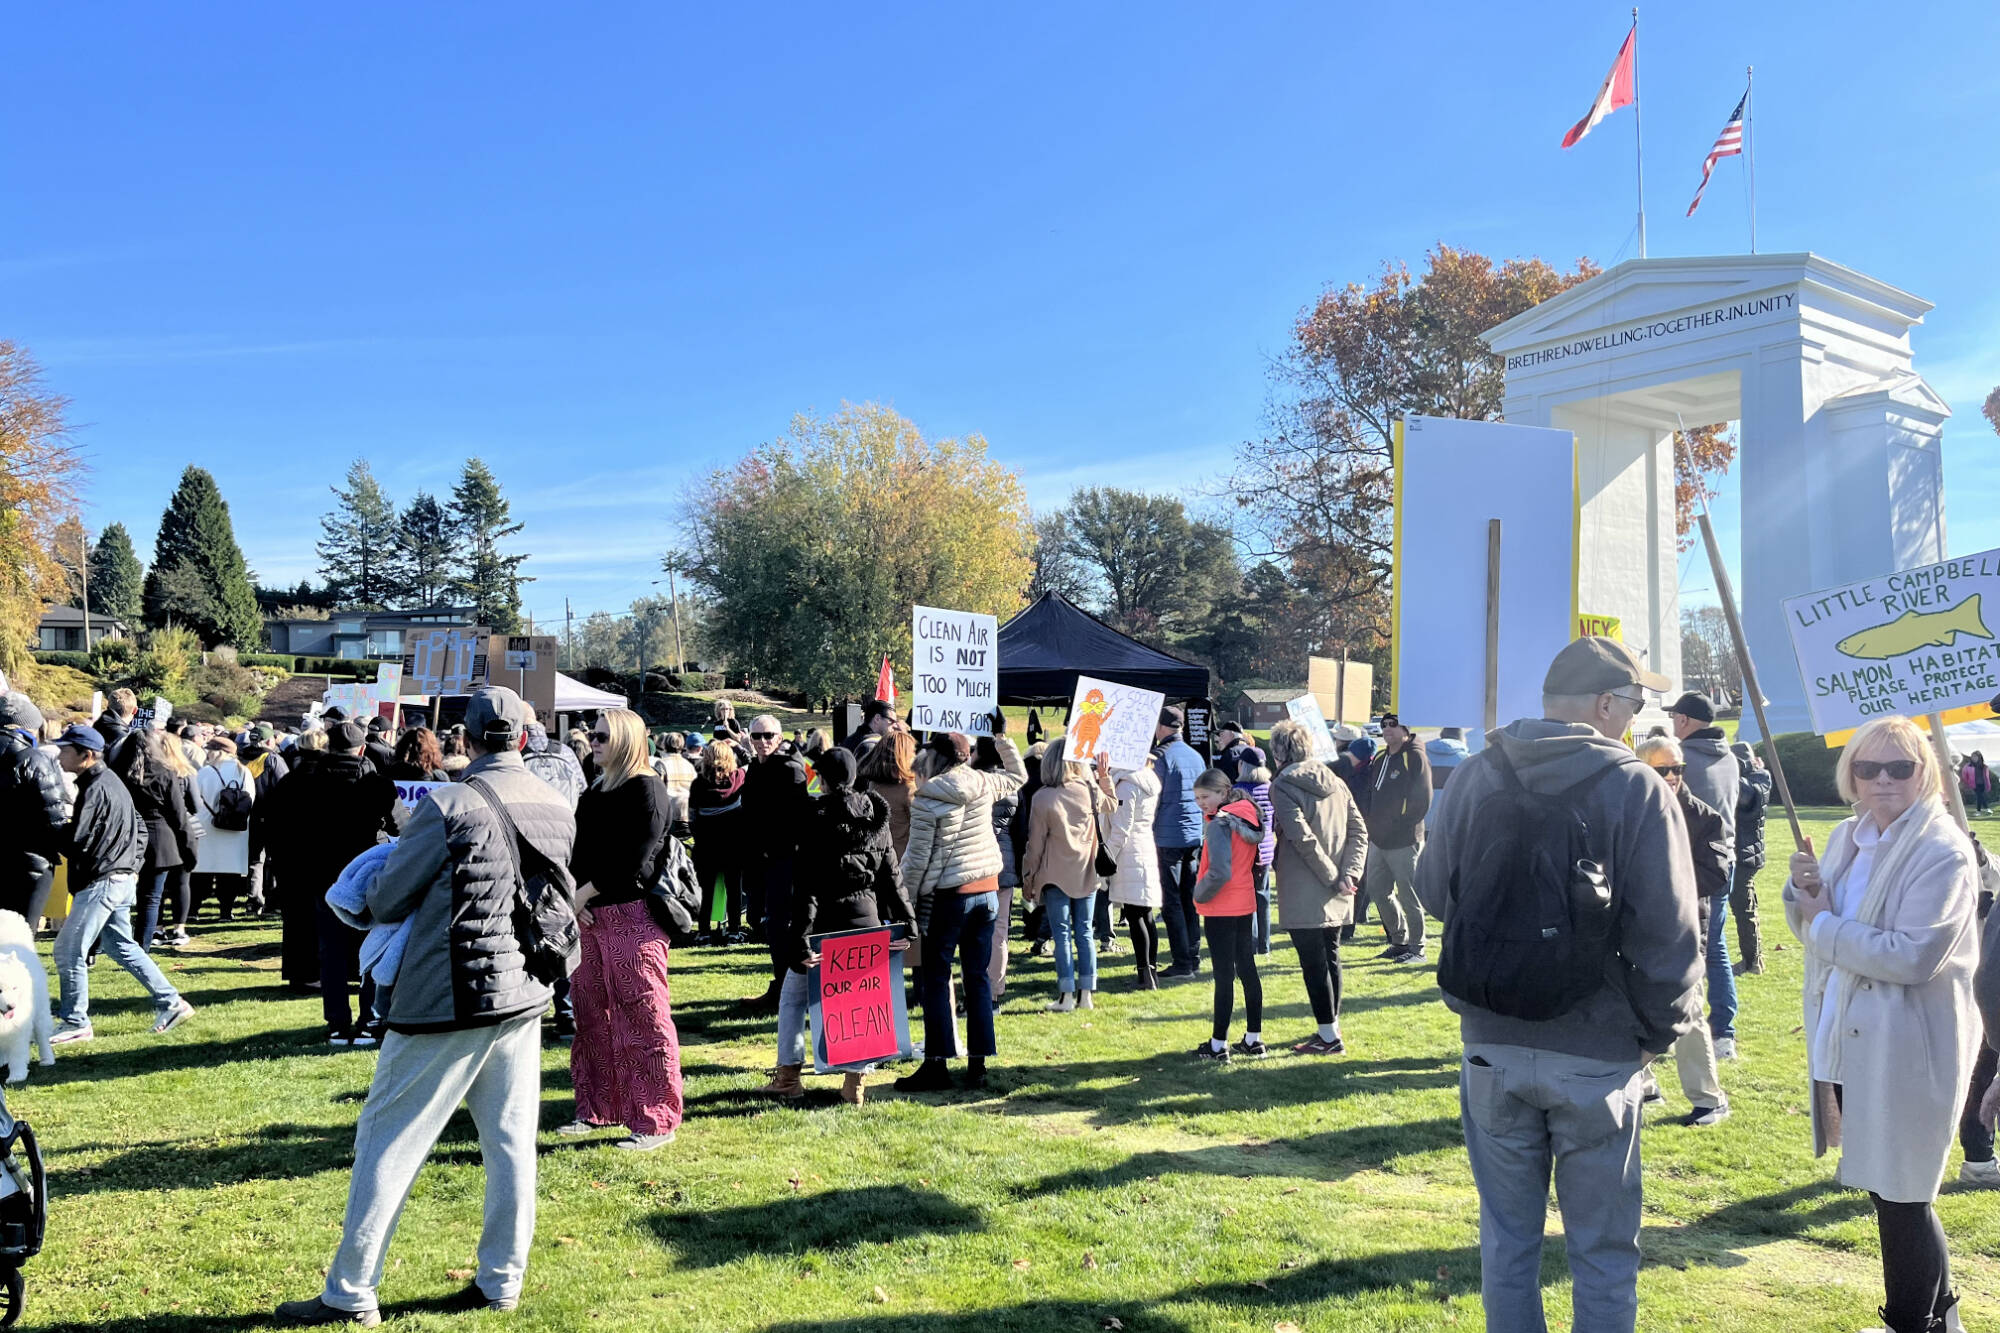 Fighting for Clean Air: Opposing the South Surrey Biofuel Facility